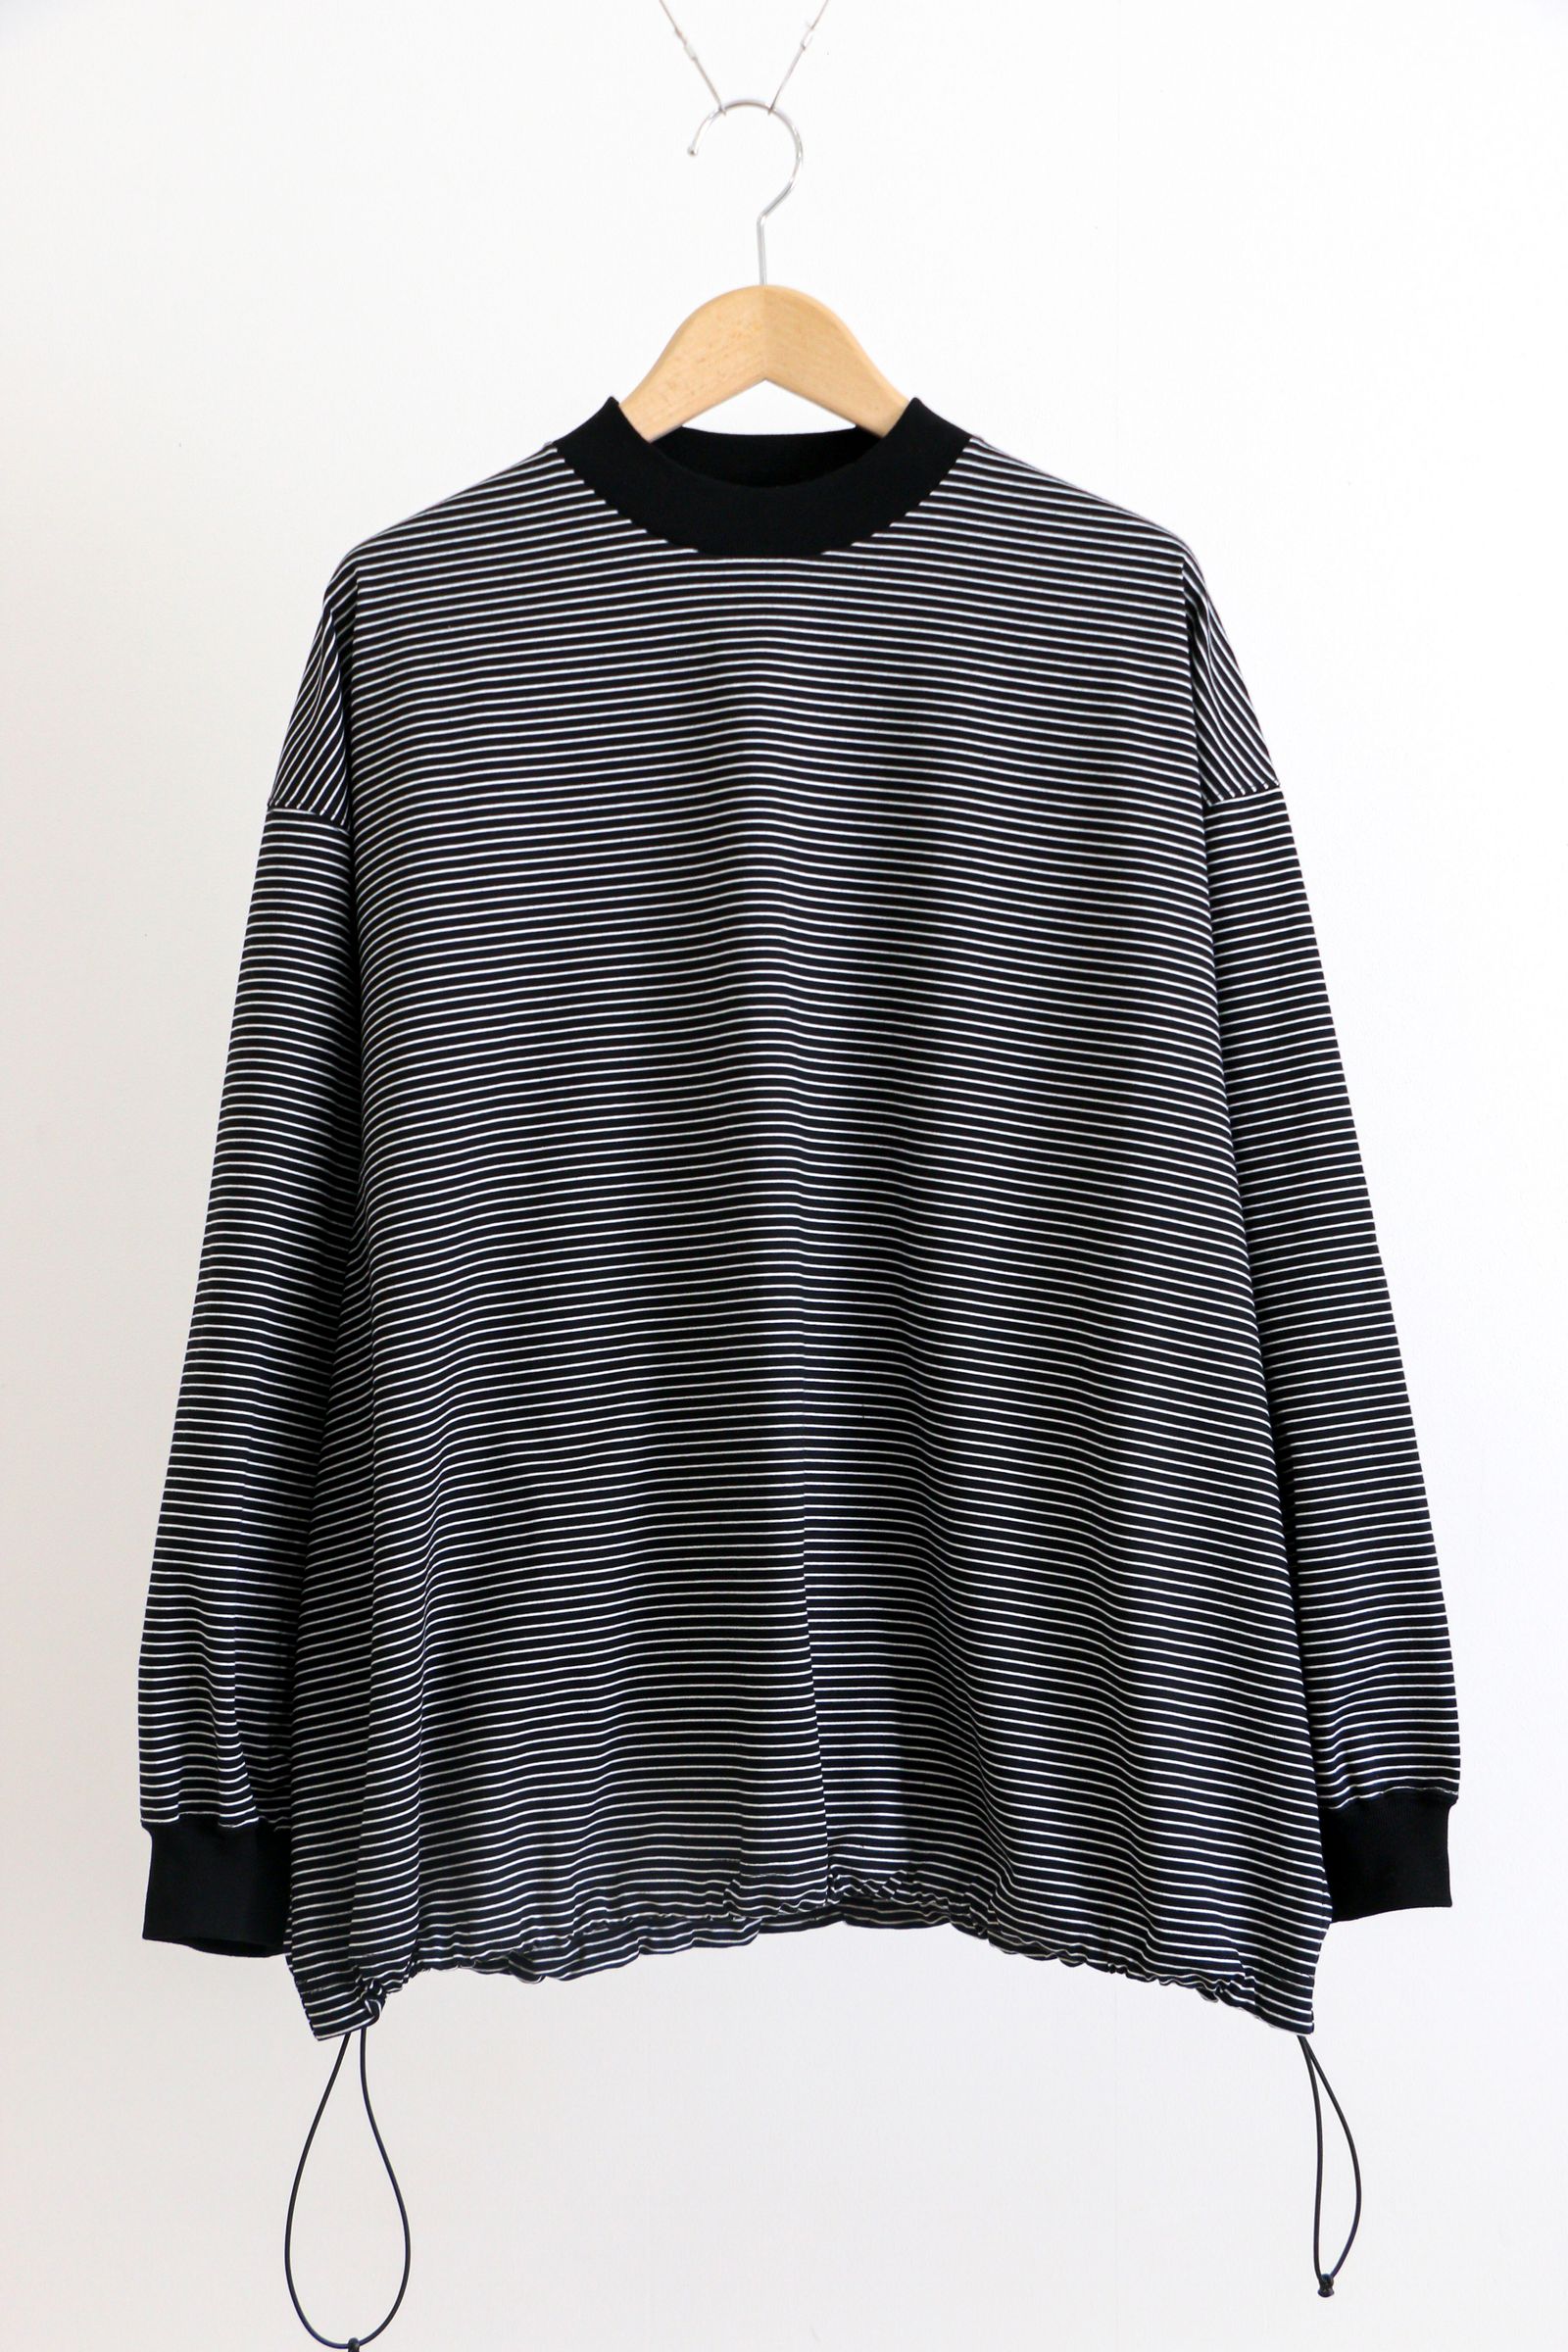 is-ness - BALLOON LONG T SHIRT NAVY / ロングスリーブ / バルーン ...